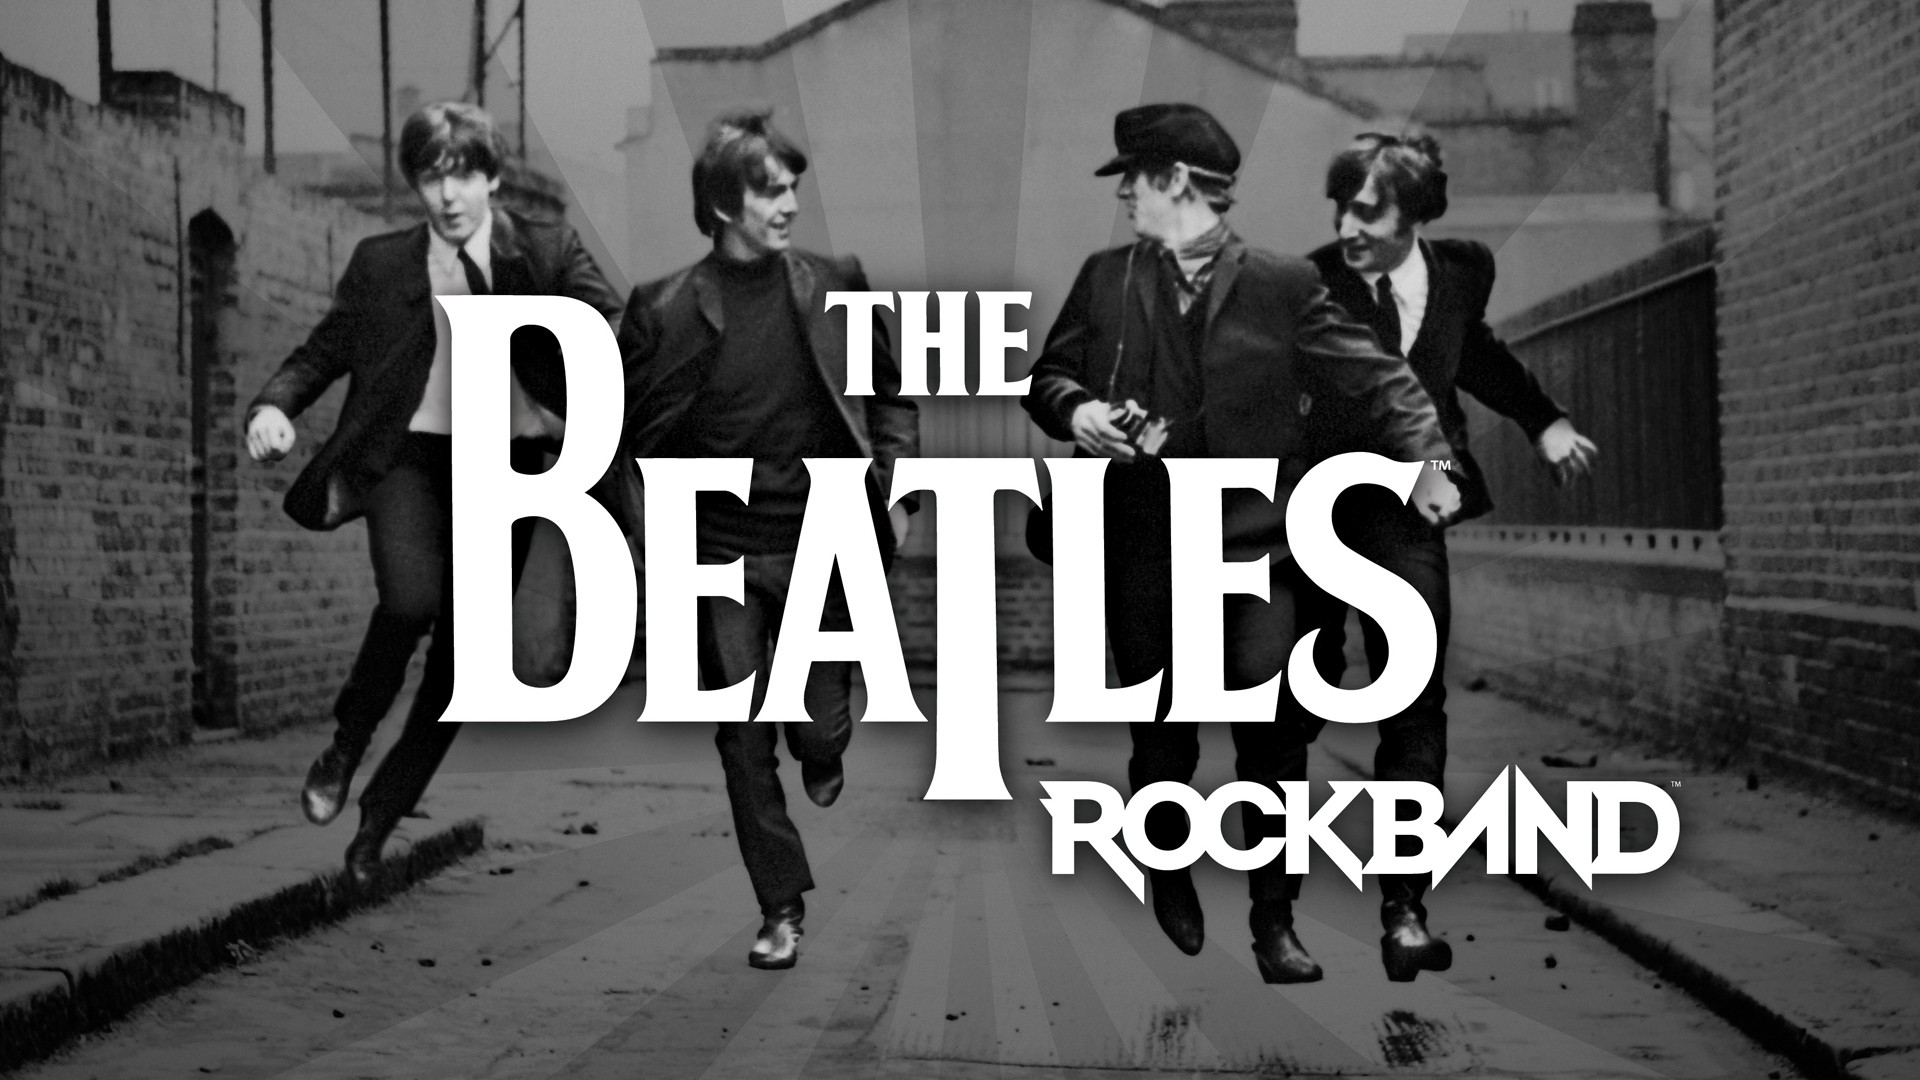 The Beatles: Rock Band wallpapers for desktop, download free The Beatles:  Rock Band pictures and backgrounds for PC 